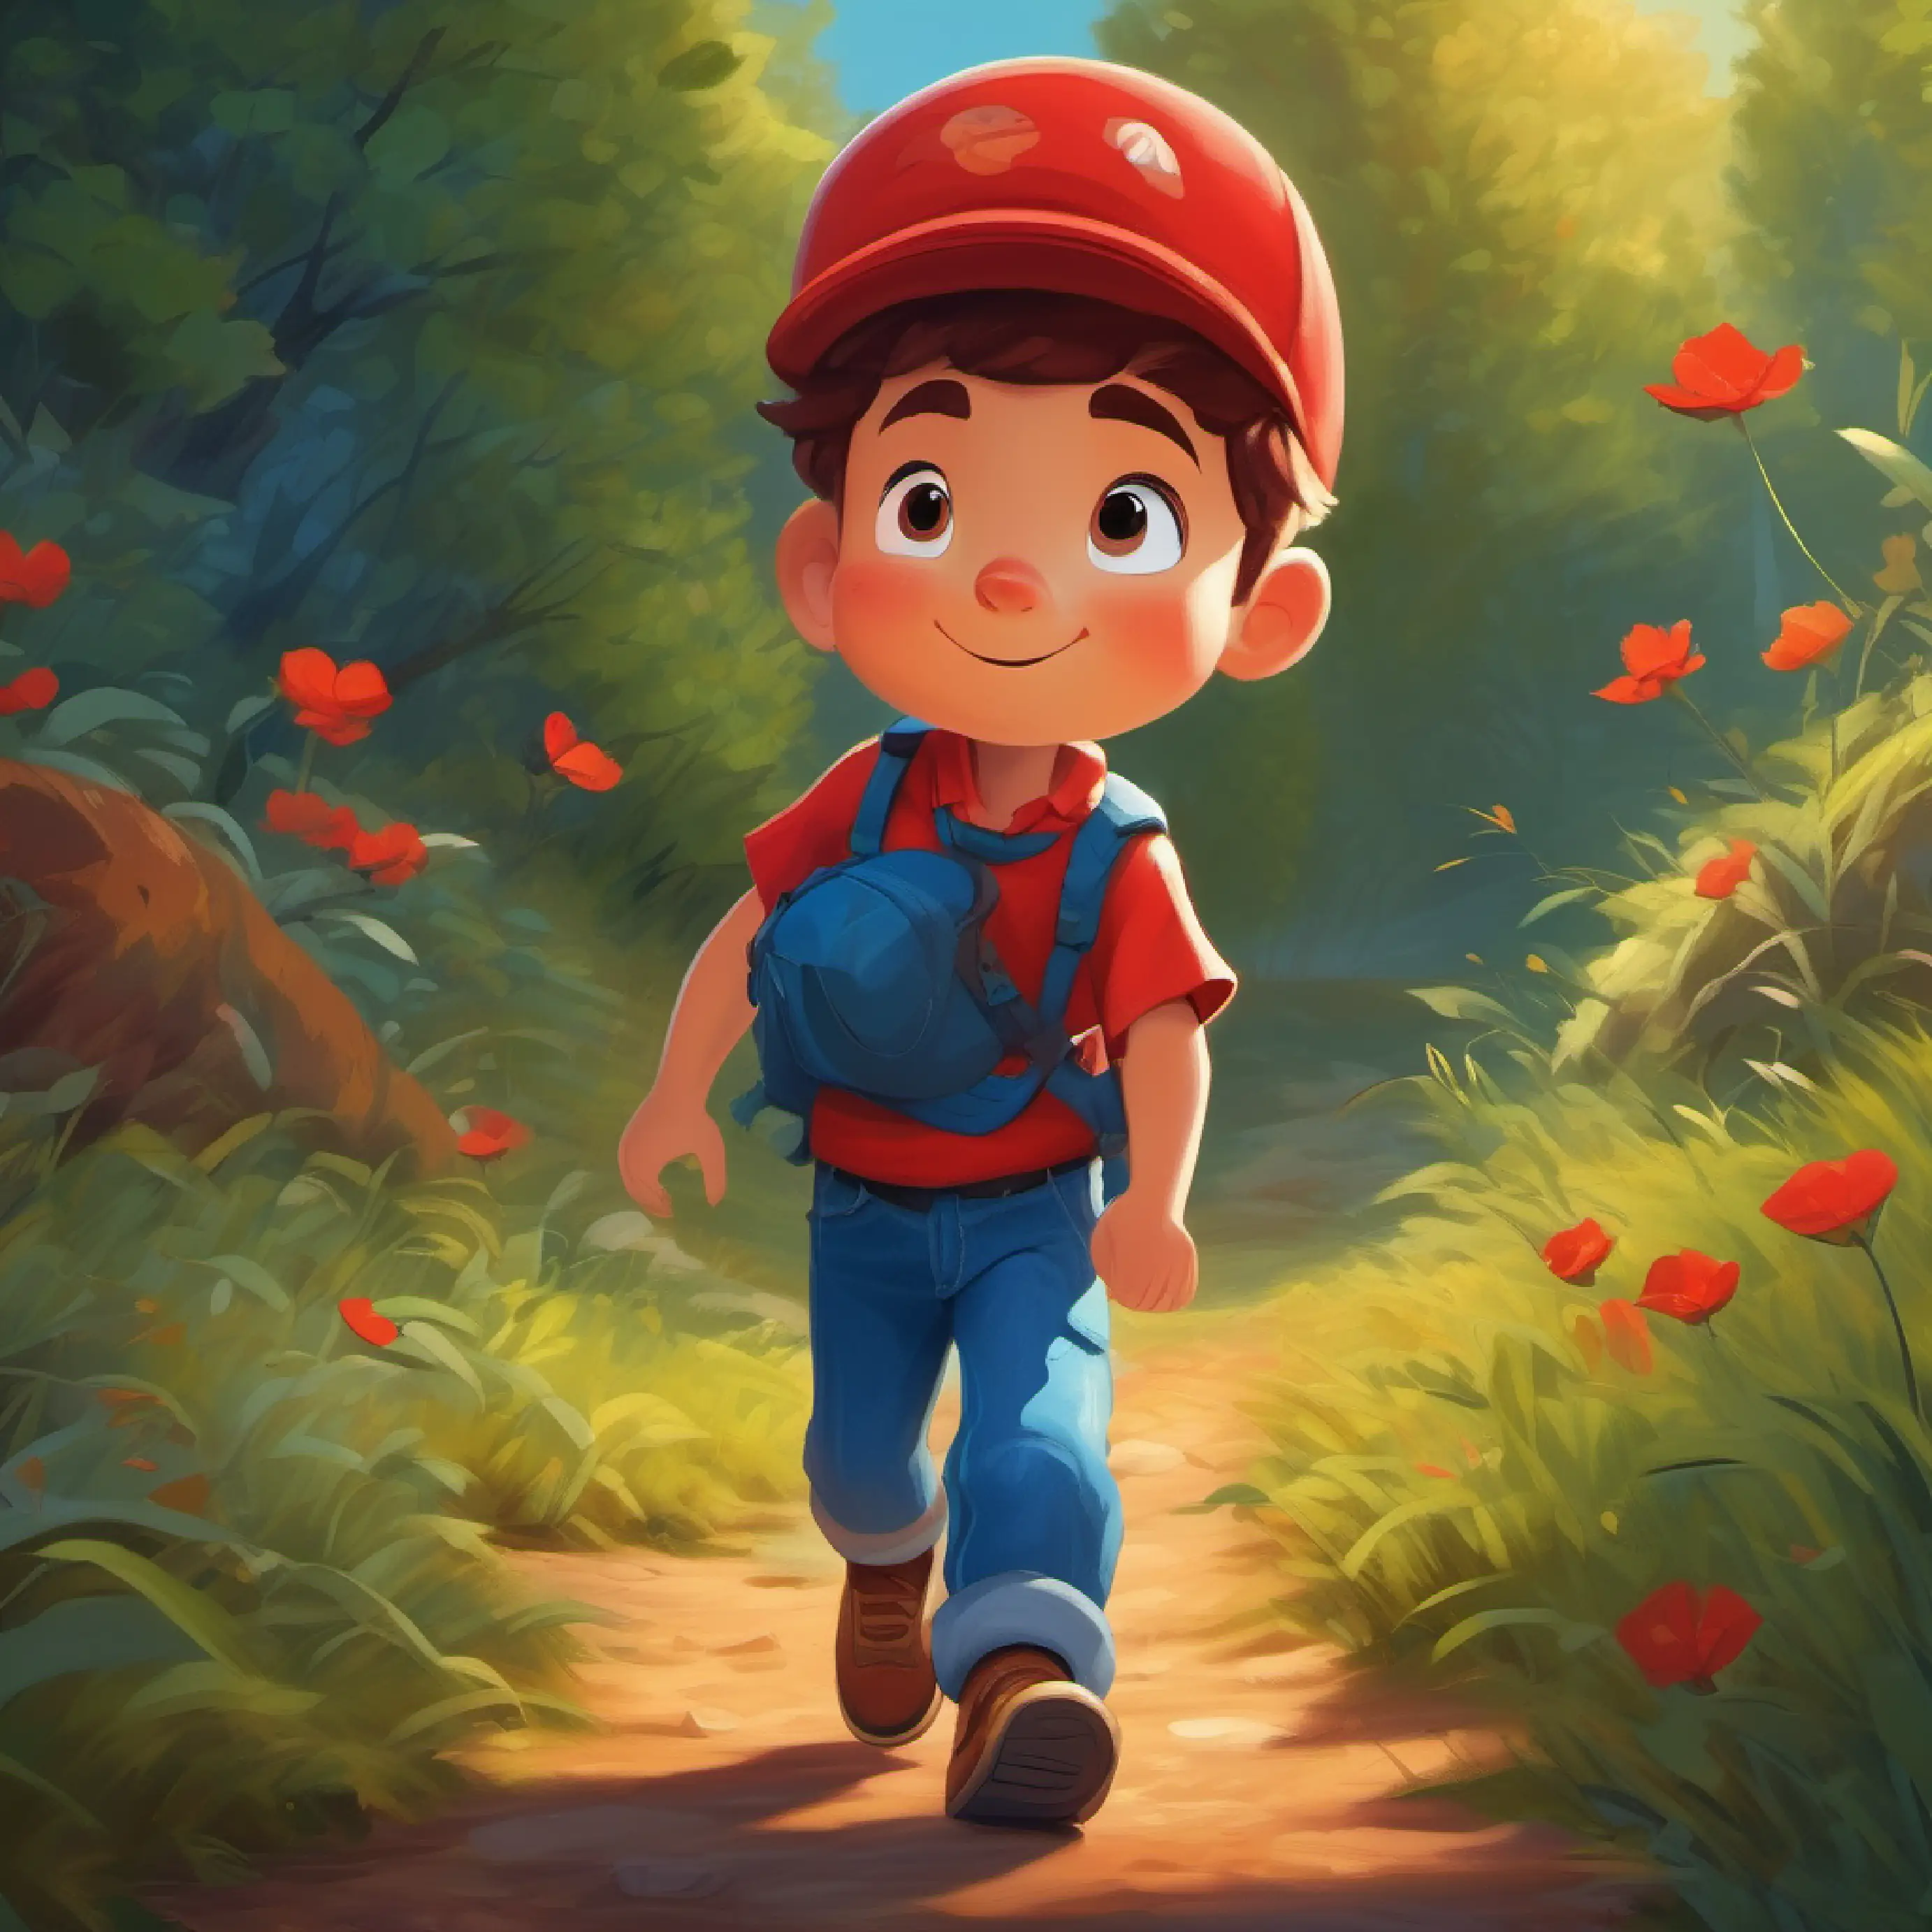 Brave boy, red cap, loves to explore, wears blue jeans returns home, dreams of next adventure